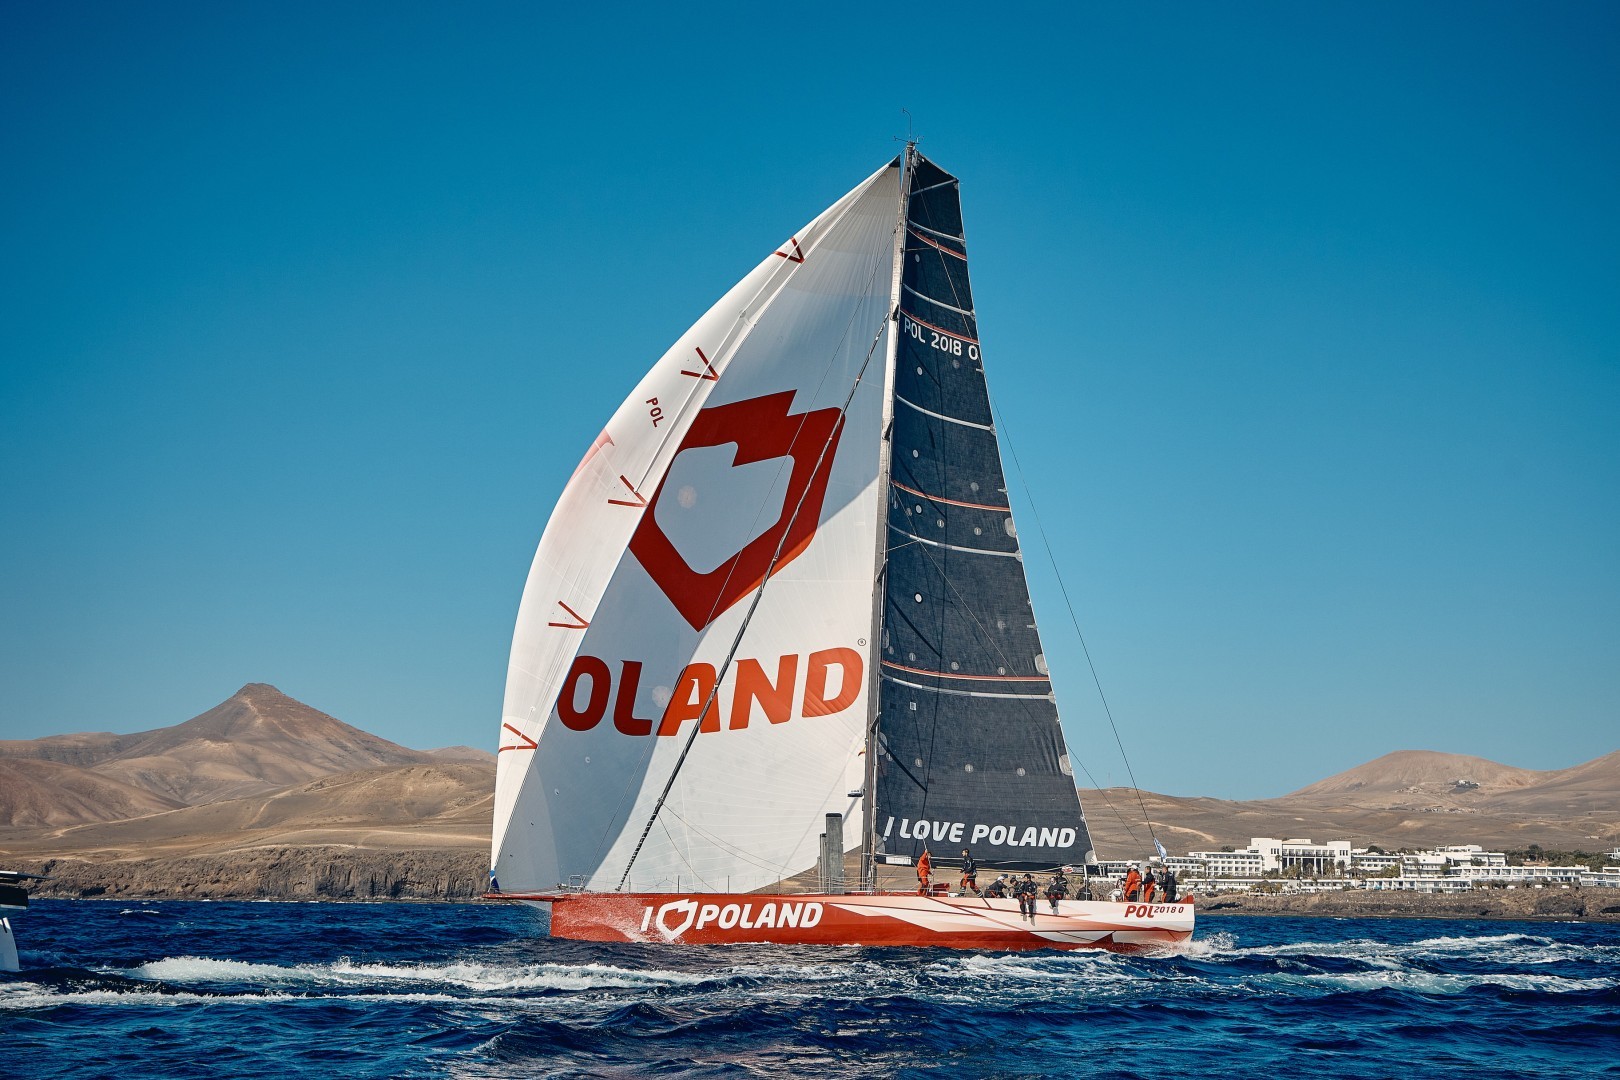 I Love Poland sets sail on the RORC Transatlantic Race in association with the IMA. Photo: RORC/James Mitchell